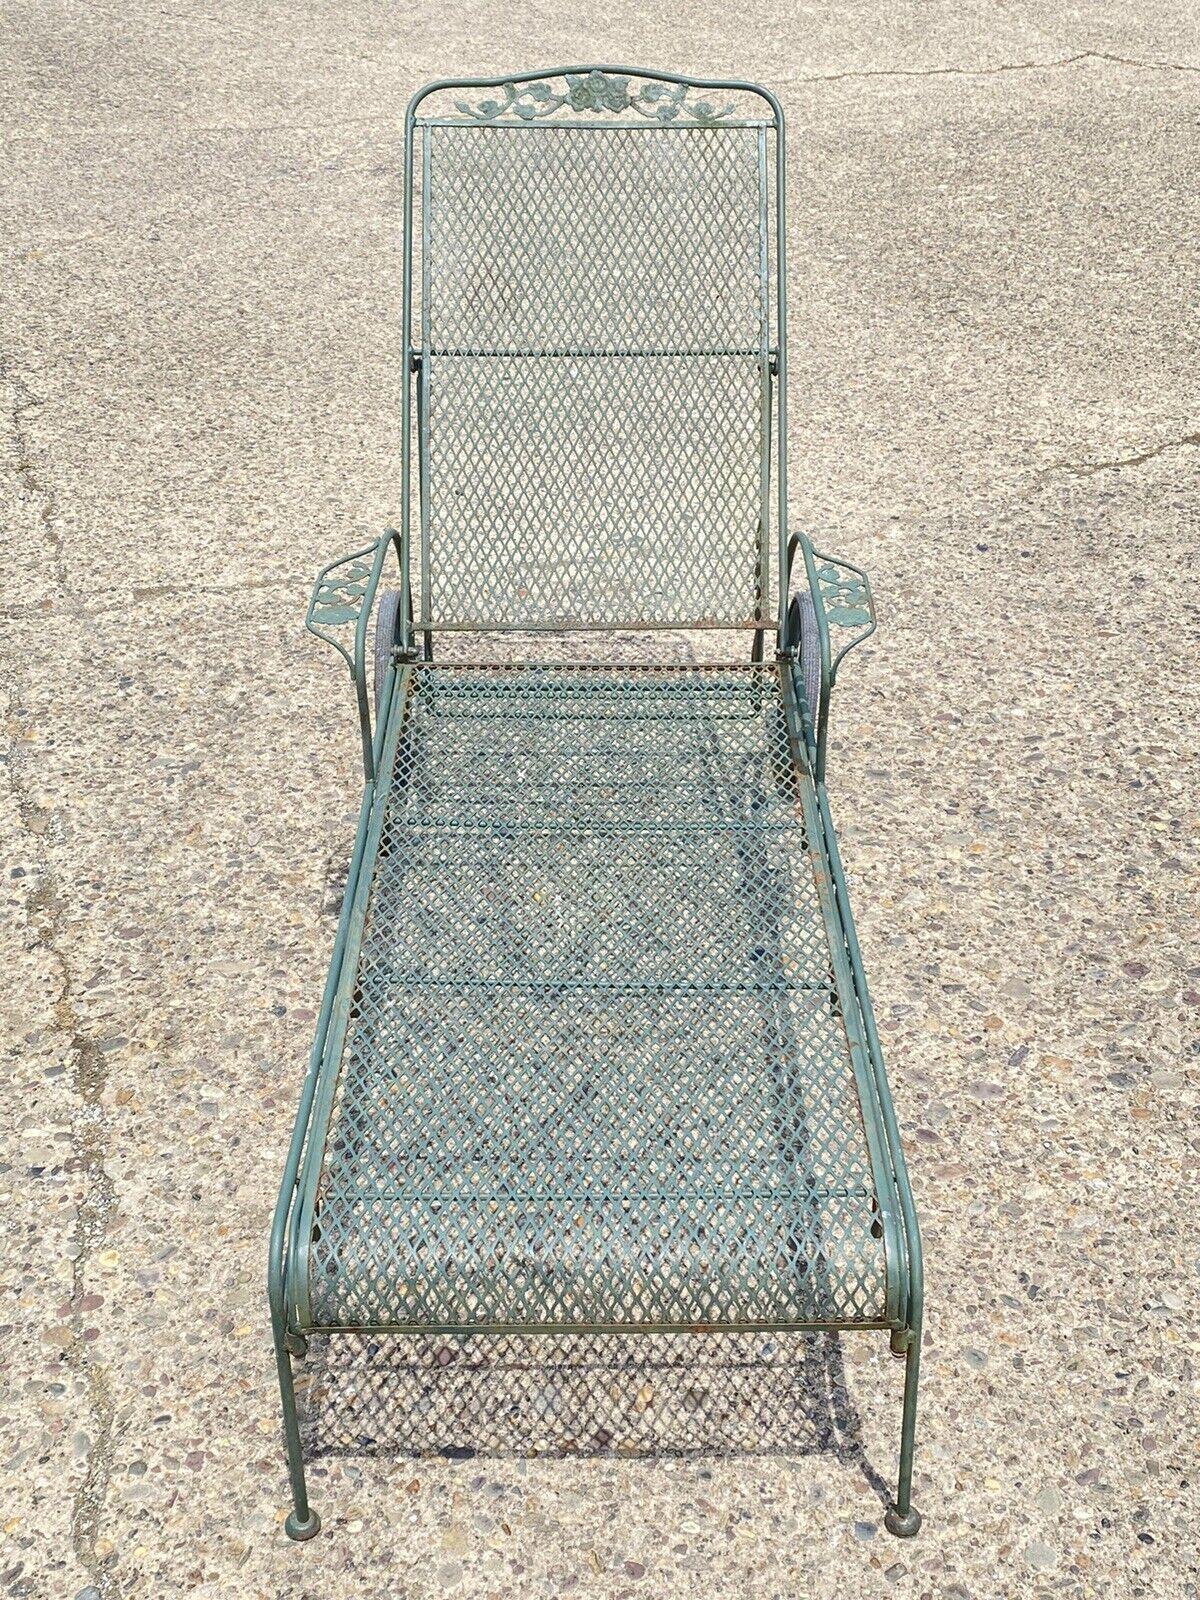 Vintage Meadowcraft Dogwood Green Wrought Iron Adjustable Outdoor Patio Chaise Lounge Chair, circa Mid to Late 20th century. Measurements: 38